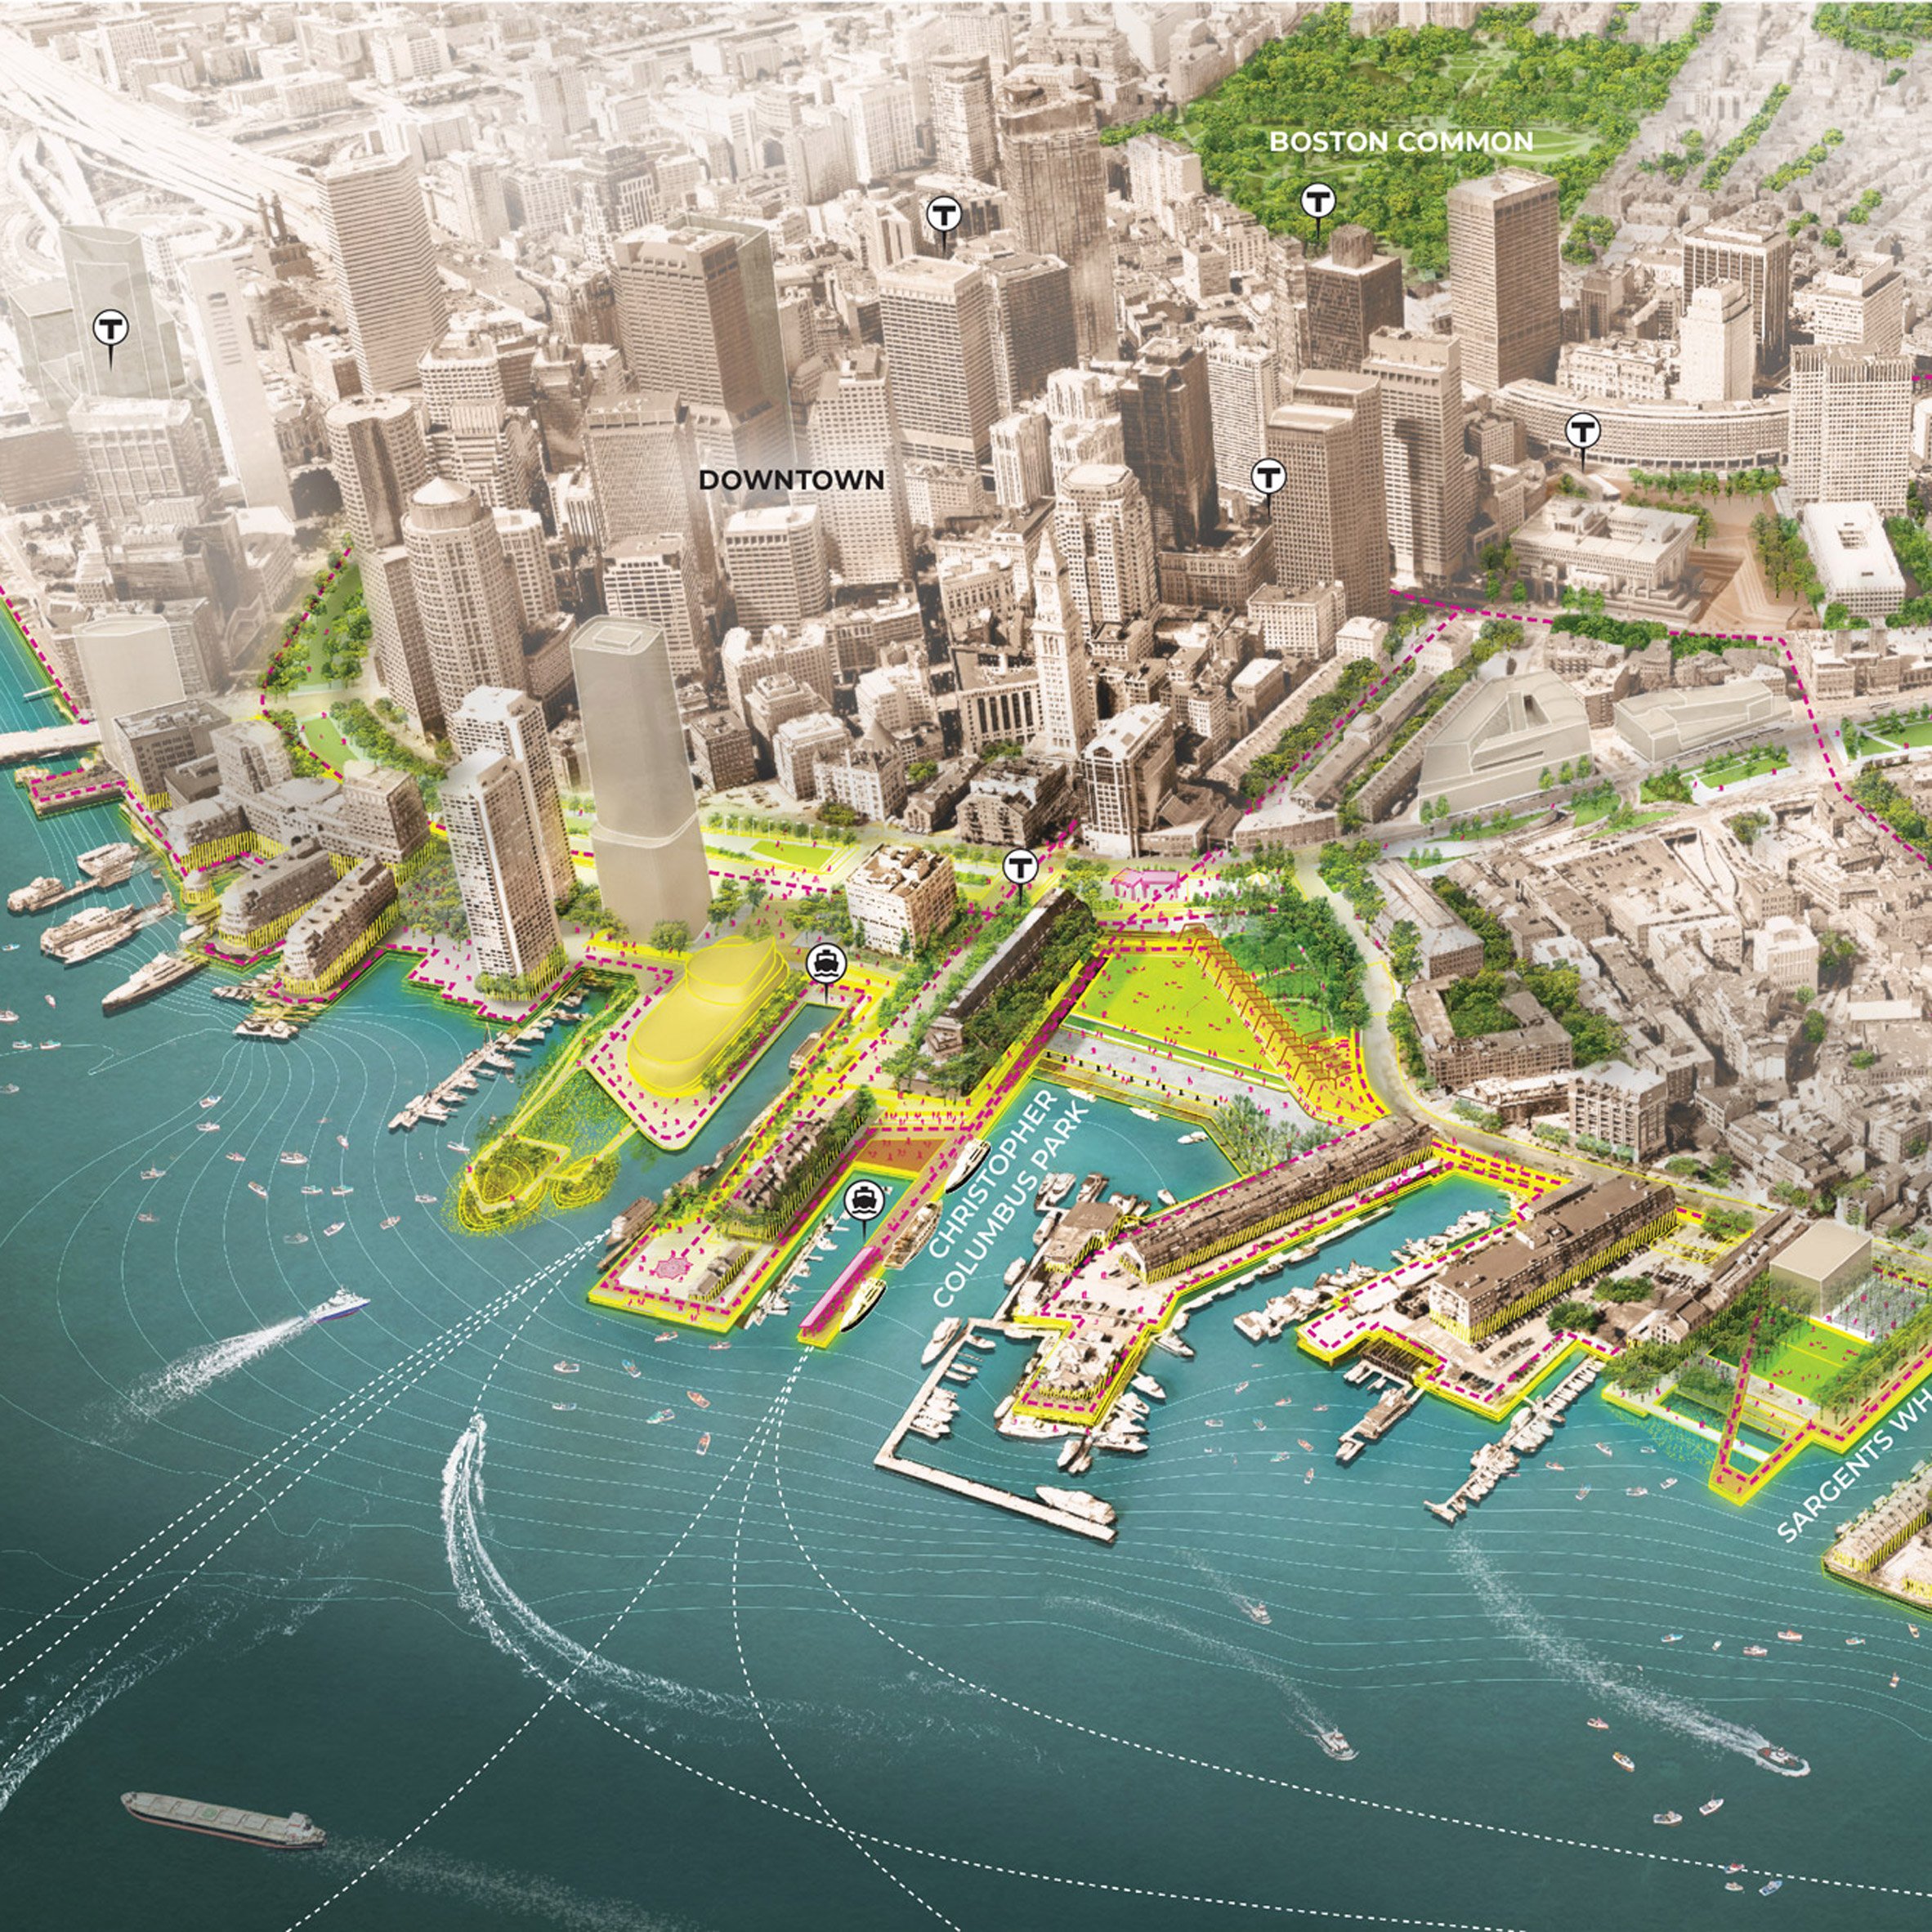 Resilient Boston Harbor by SCAPE